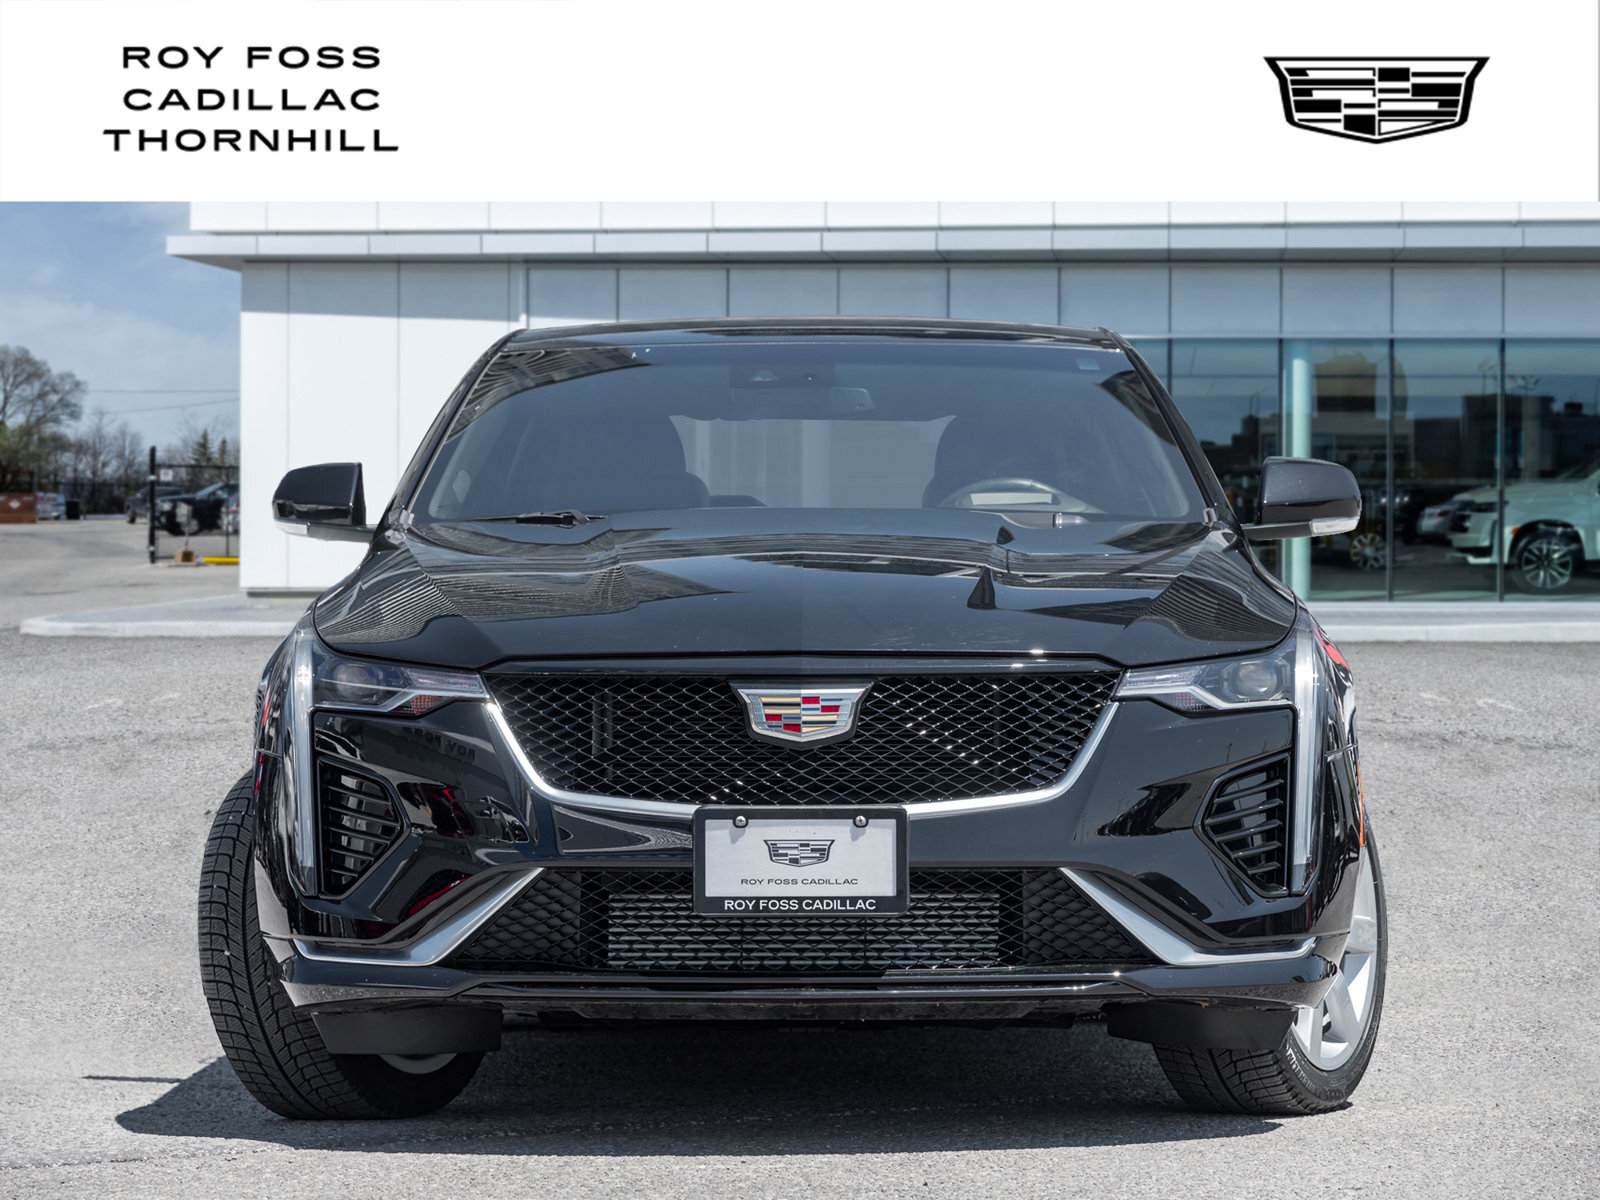 2020 Cadillac CT4 RATES STARTING FROM 4.99%+1 OWNER+LOW KM+CERTIFIED